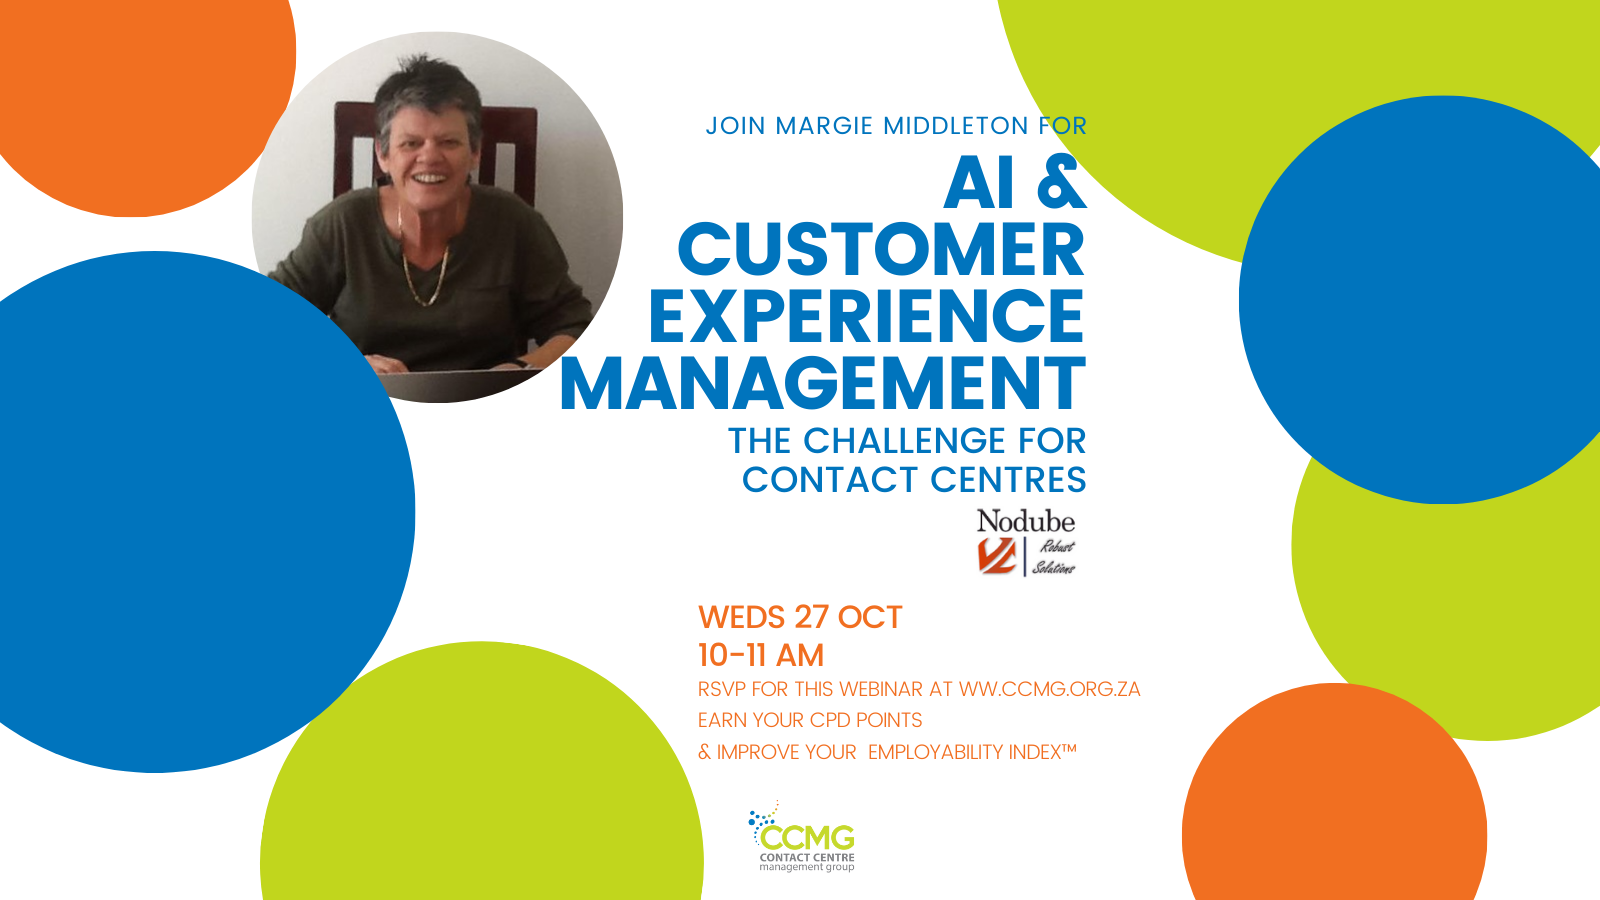 AI & Customer Experience Management - The Challenge for Contact Centres